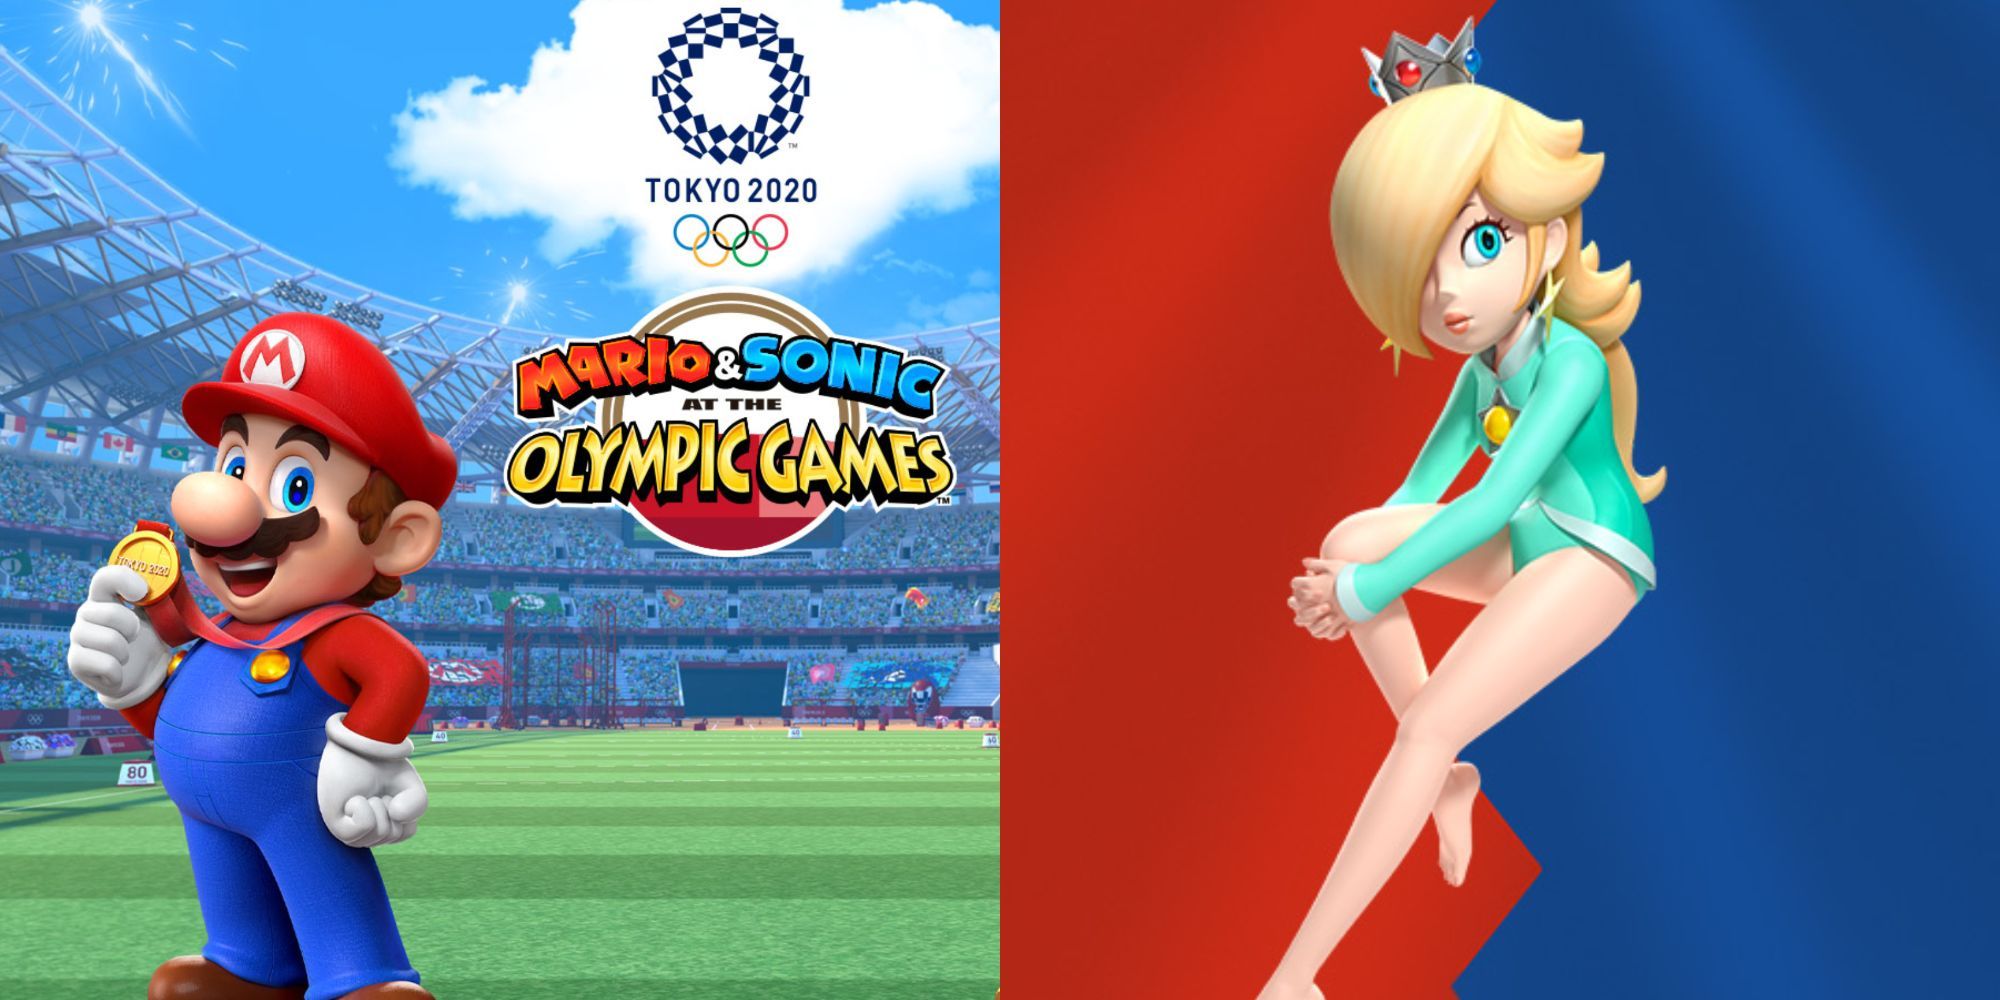 Rosalina at the 2016 Rio olympics, beside the poster for Mario and Sonic at the Olympic Games 2020